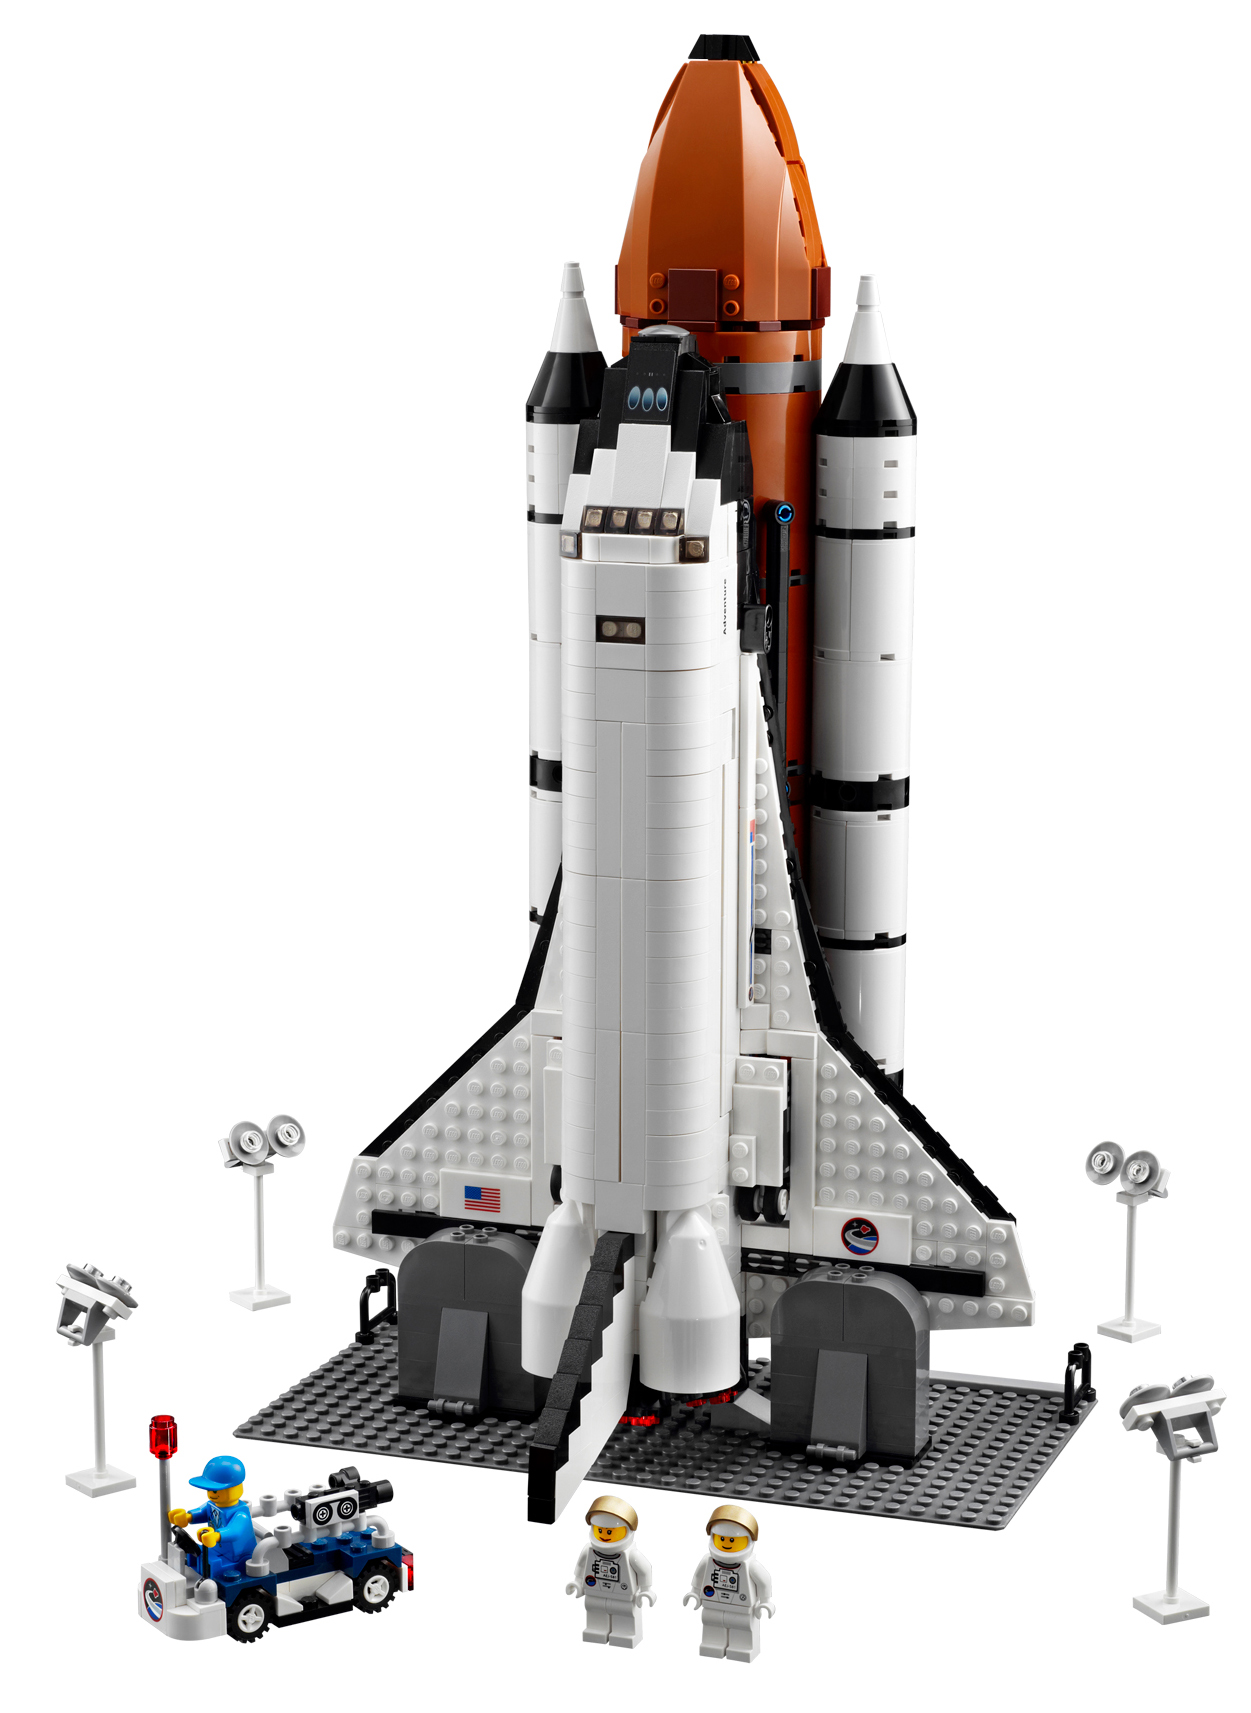 LEGO: NASA space shuttle sets (1990-2010) - collectSPACE: Messages